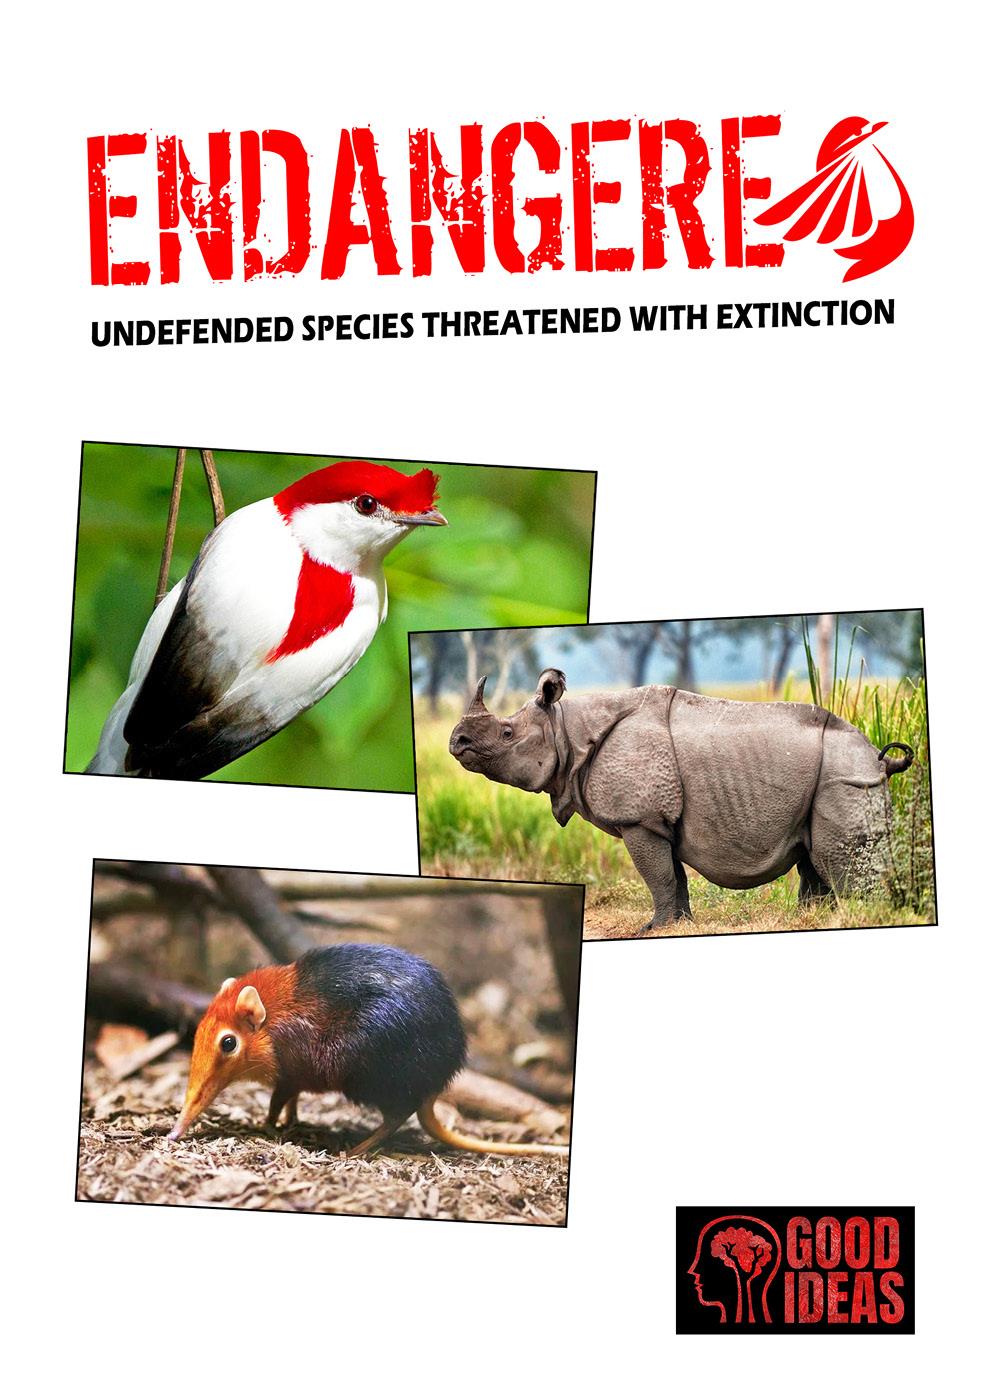 Endangered - Undefended species threatened with extinction